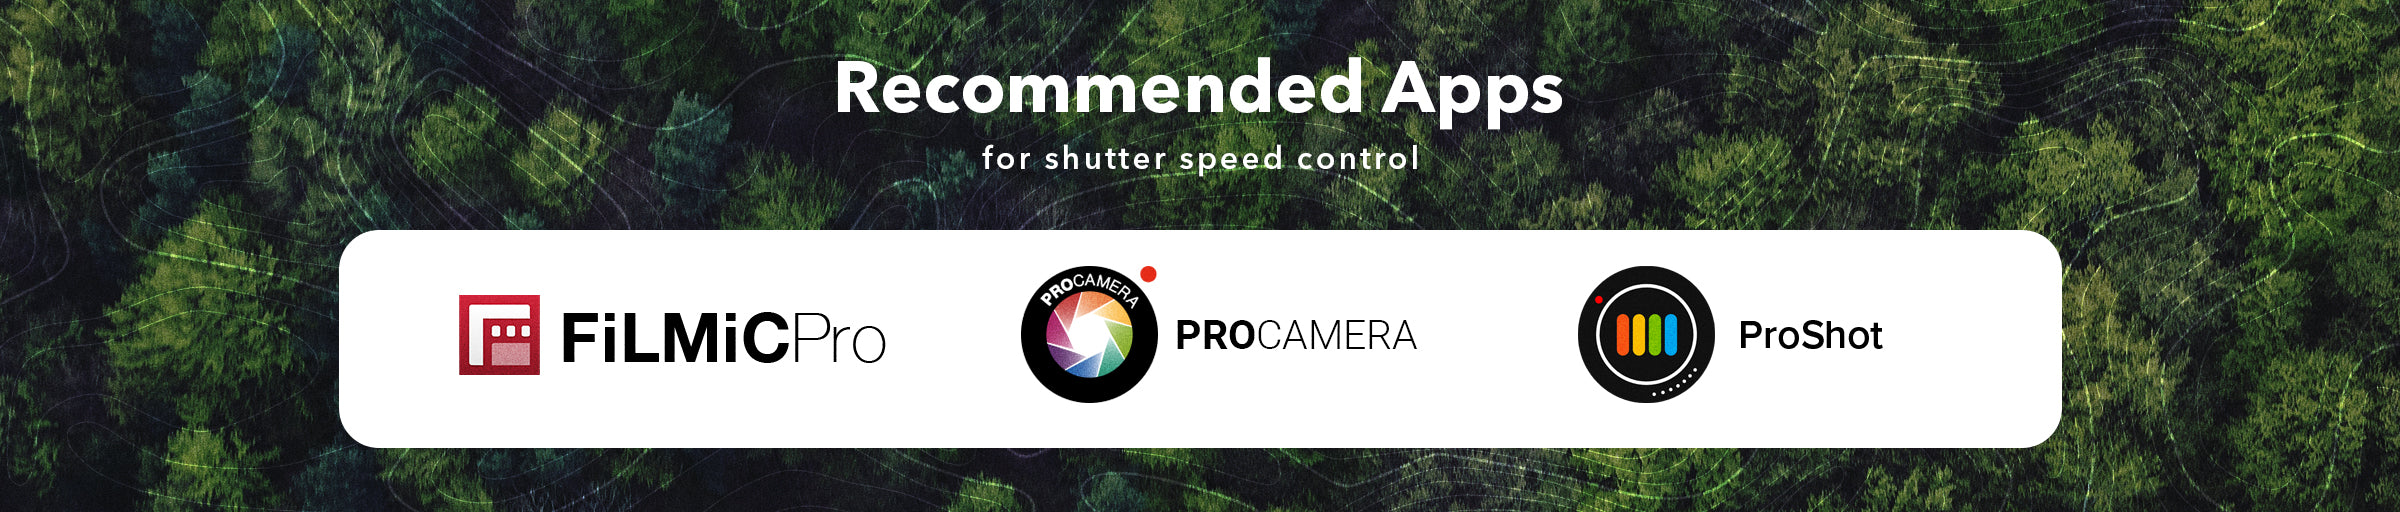 Recommended_Apps-revised.jpg?48178979279